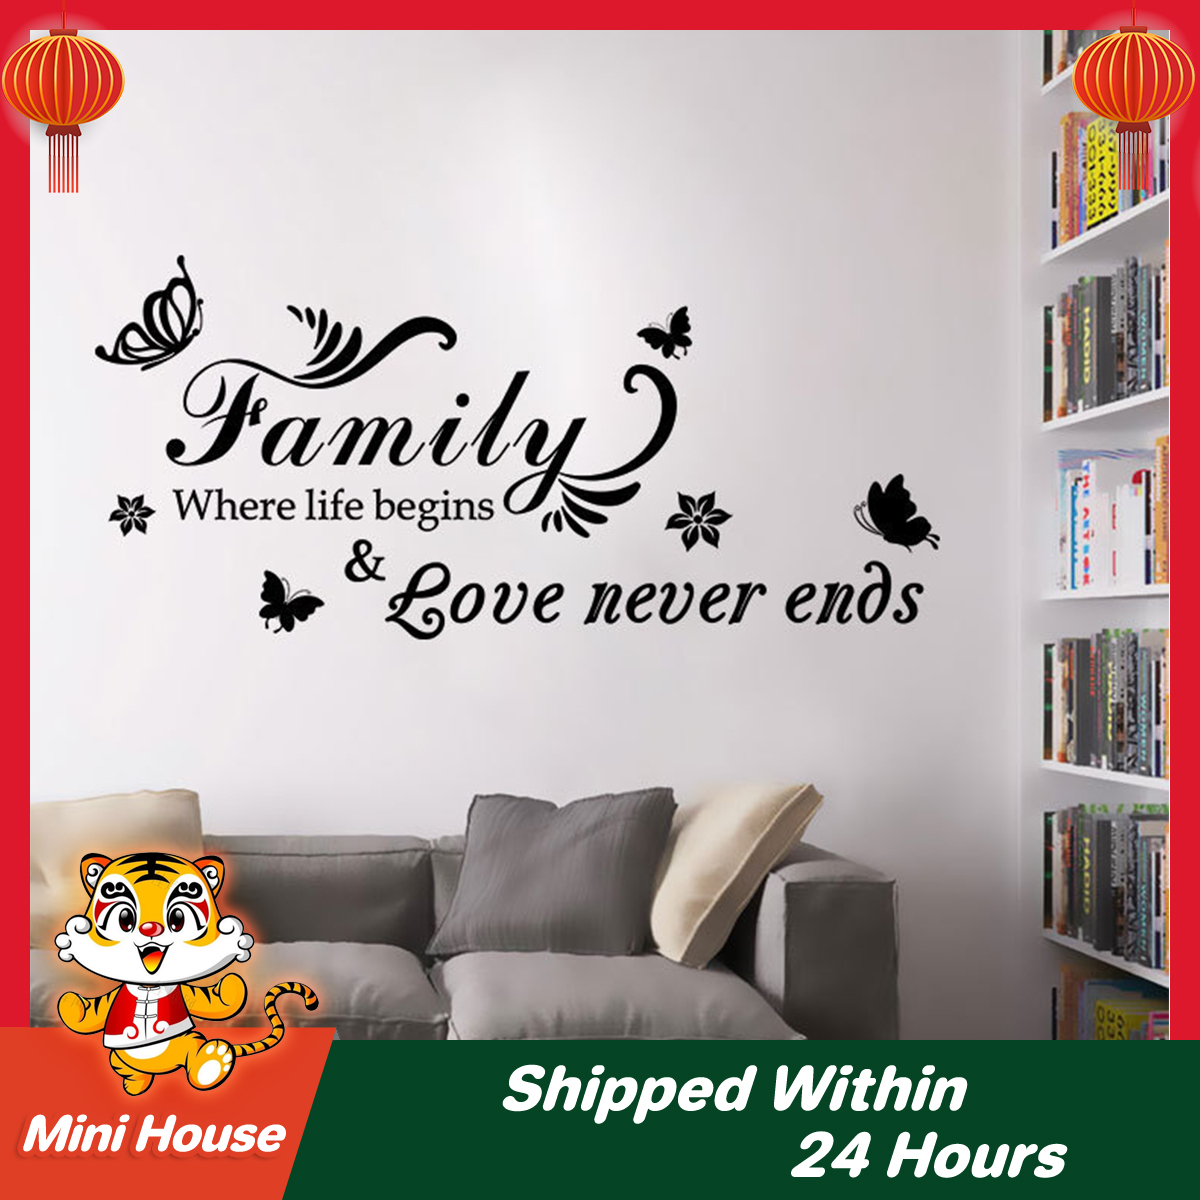 IN THIS HOUSE Wall Decal Art Quote Removable DIY Stickers Home Decoration 